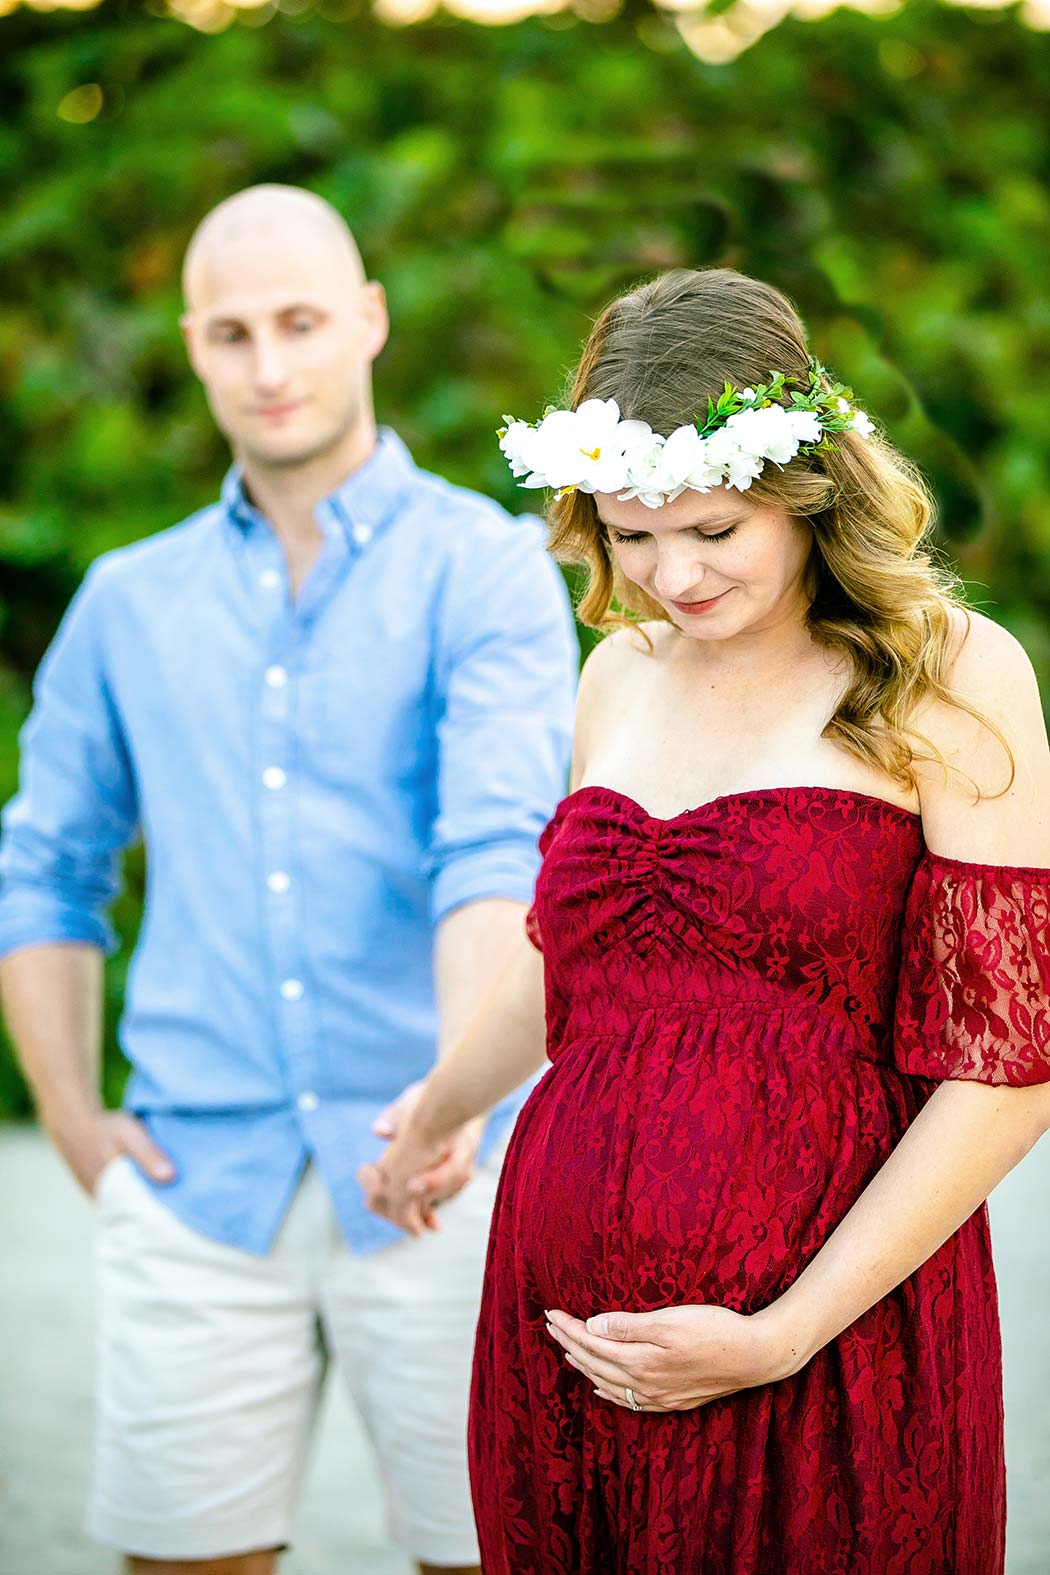 unique maternity photography pose | man and woman maternity photos | south florida maternity photographer | fort lauderdale maternity photographer